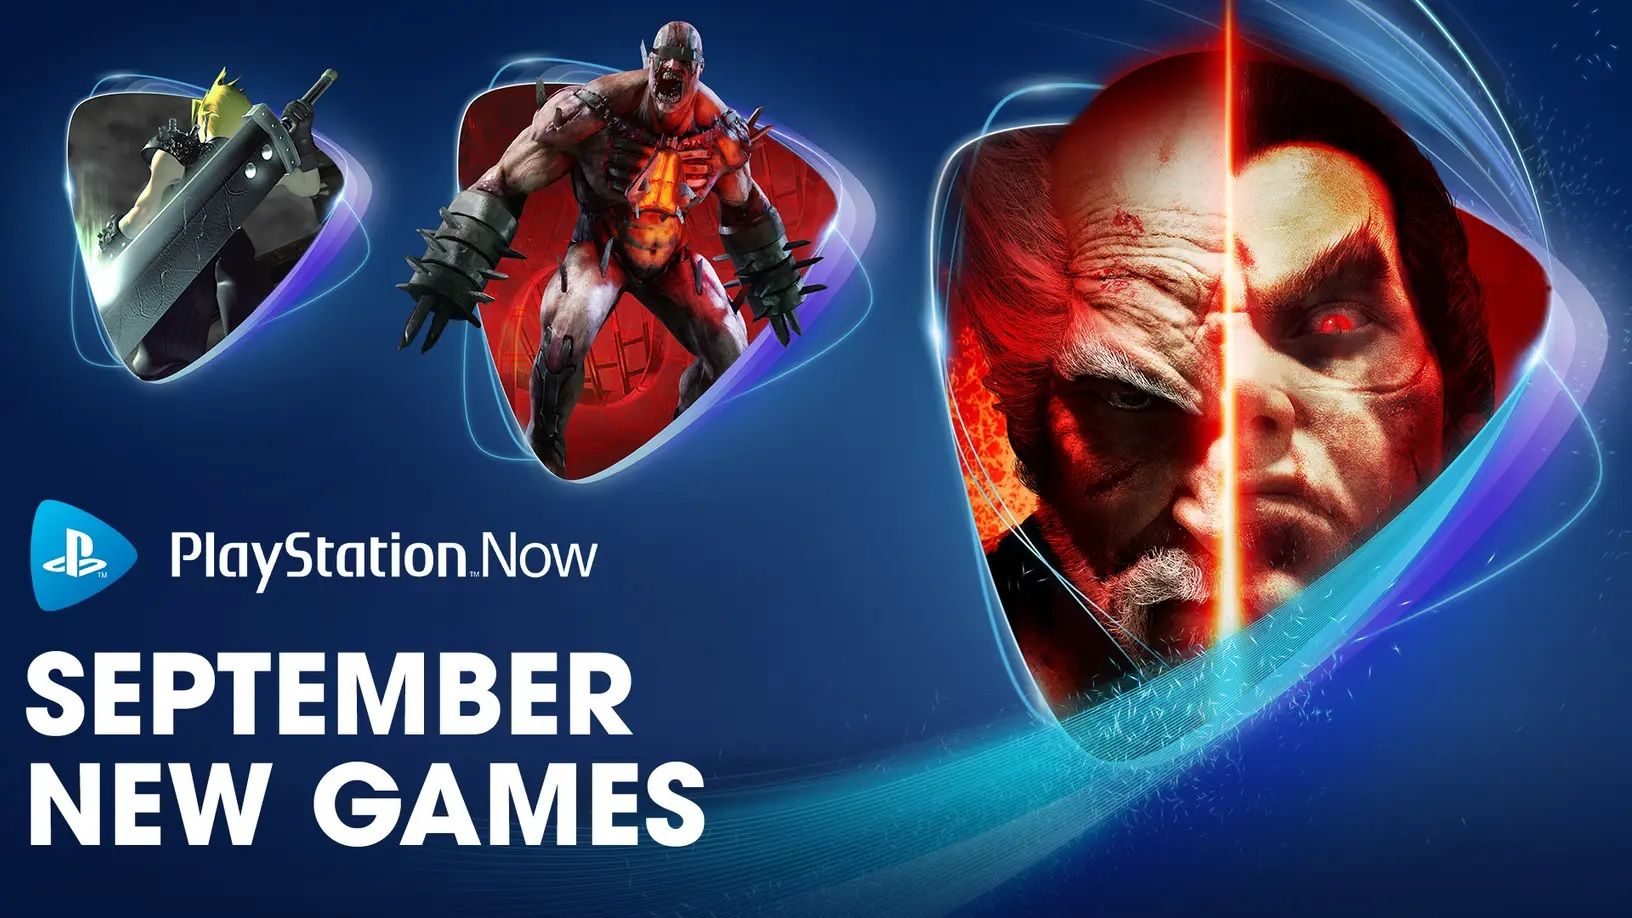 playstation-now-new-games-september-2021-5660610